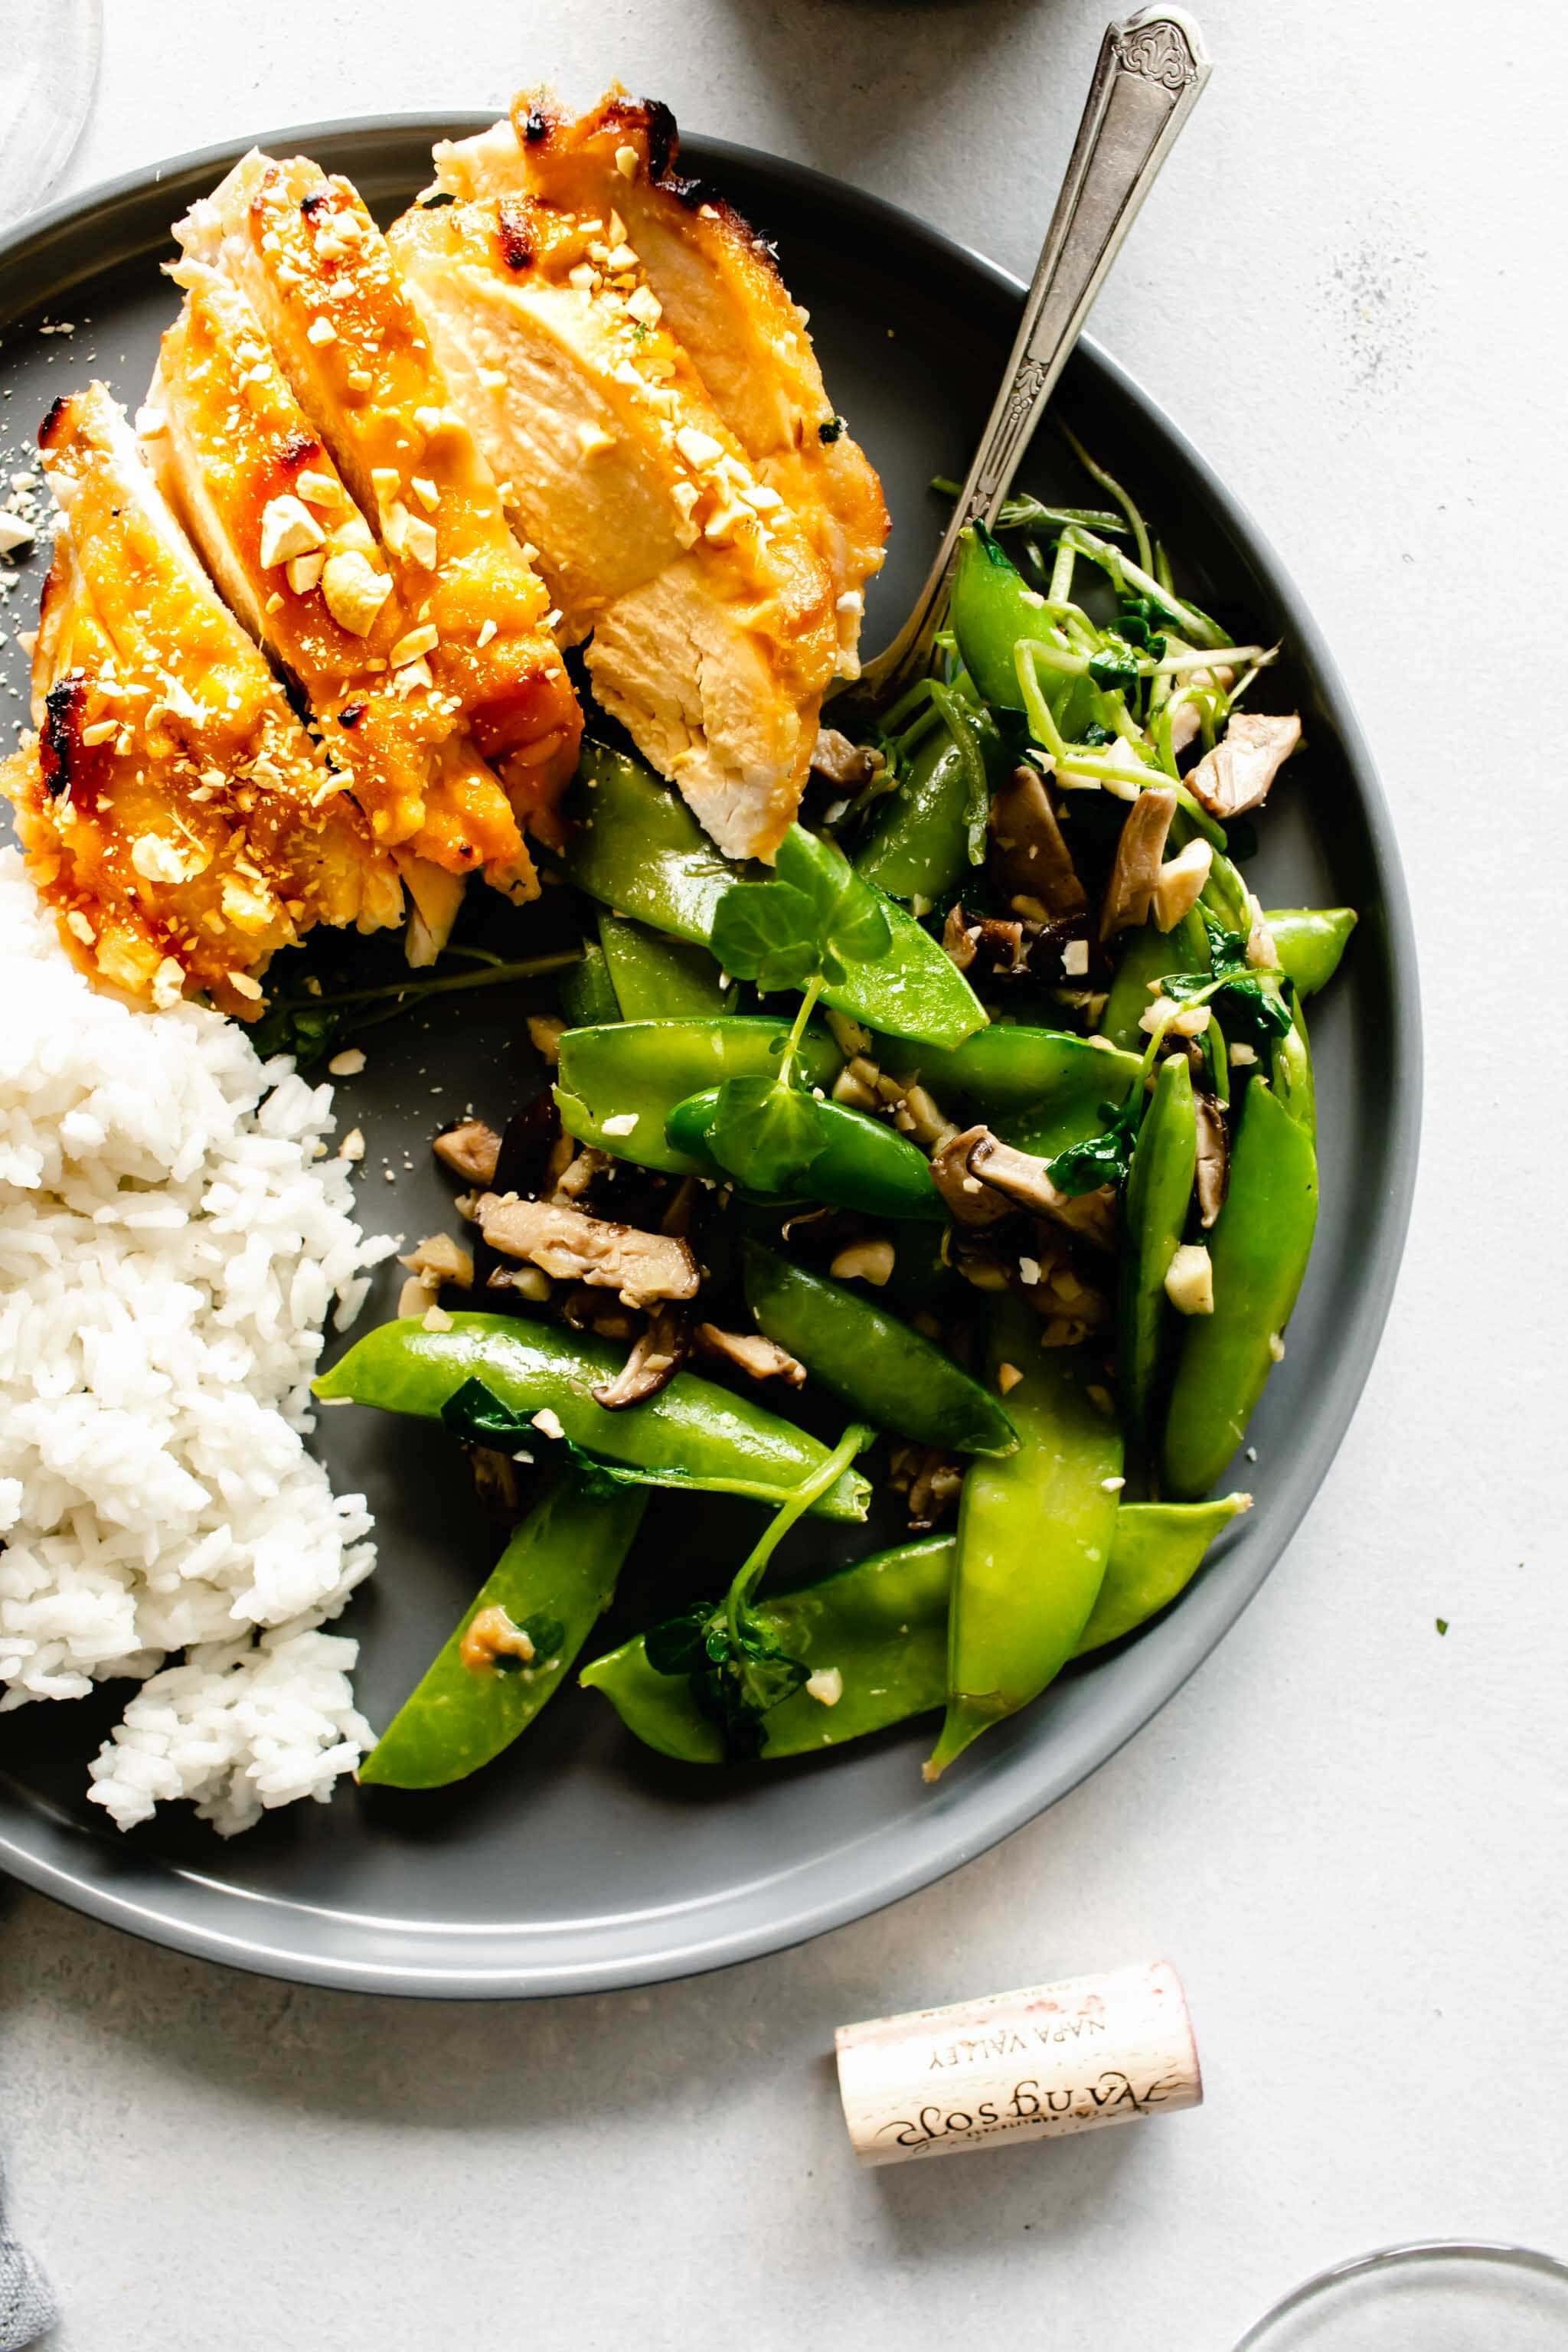 Miso chicken breast, sliced, served on grey dish with rice and green vegetables.